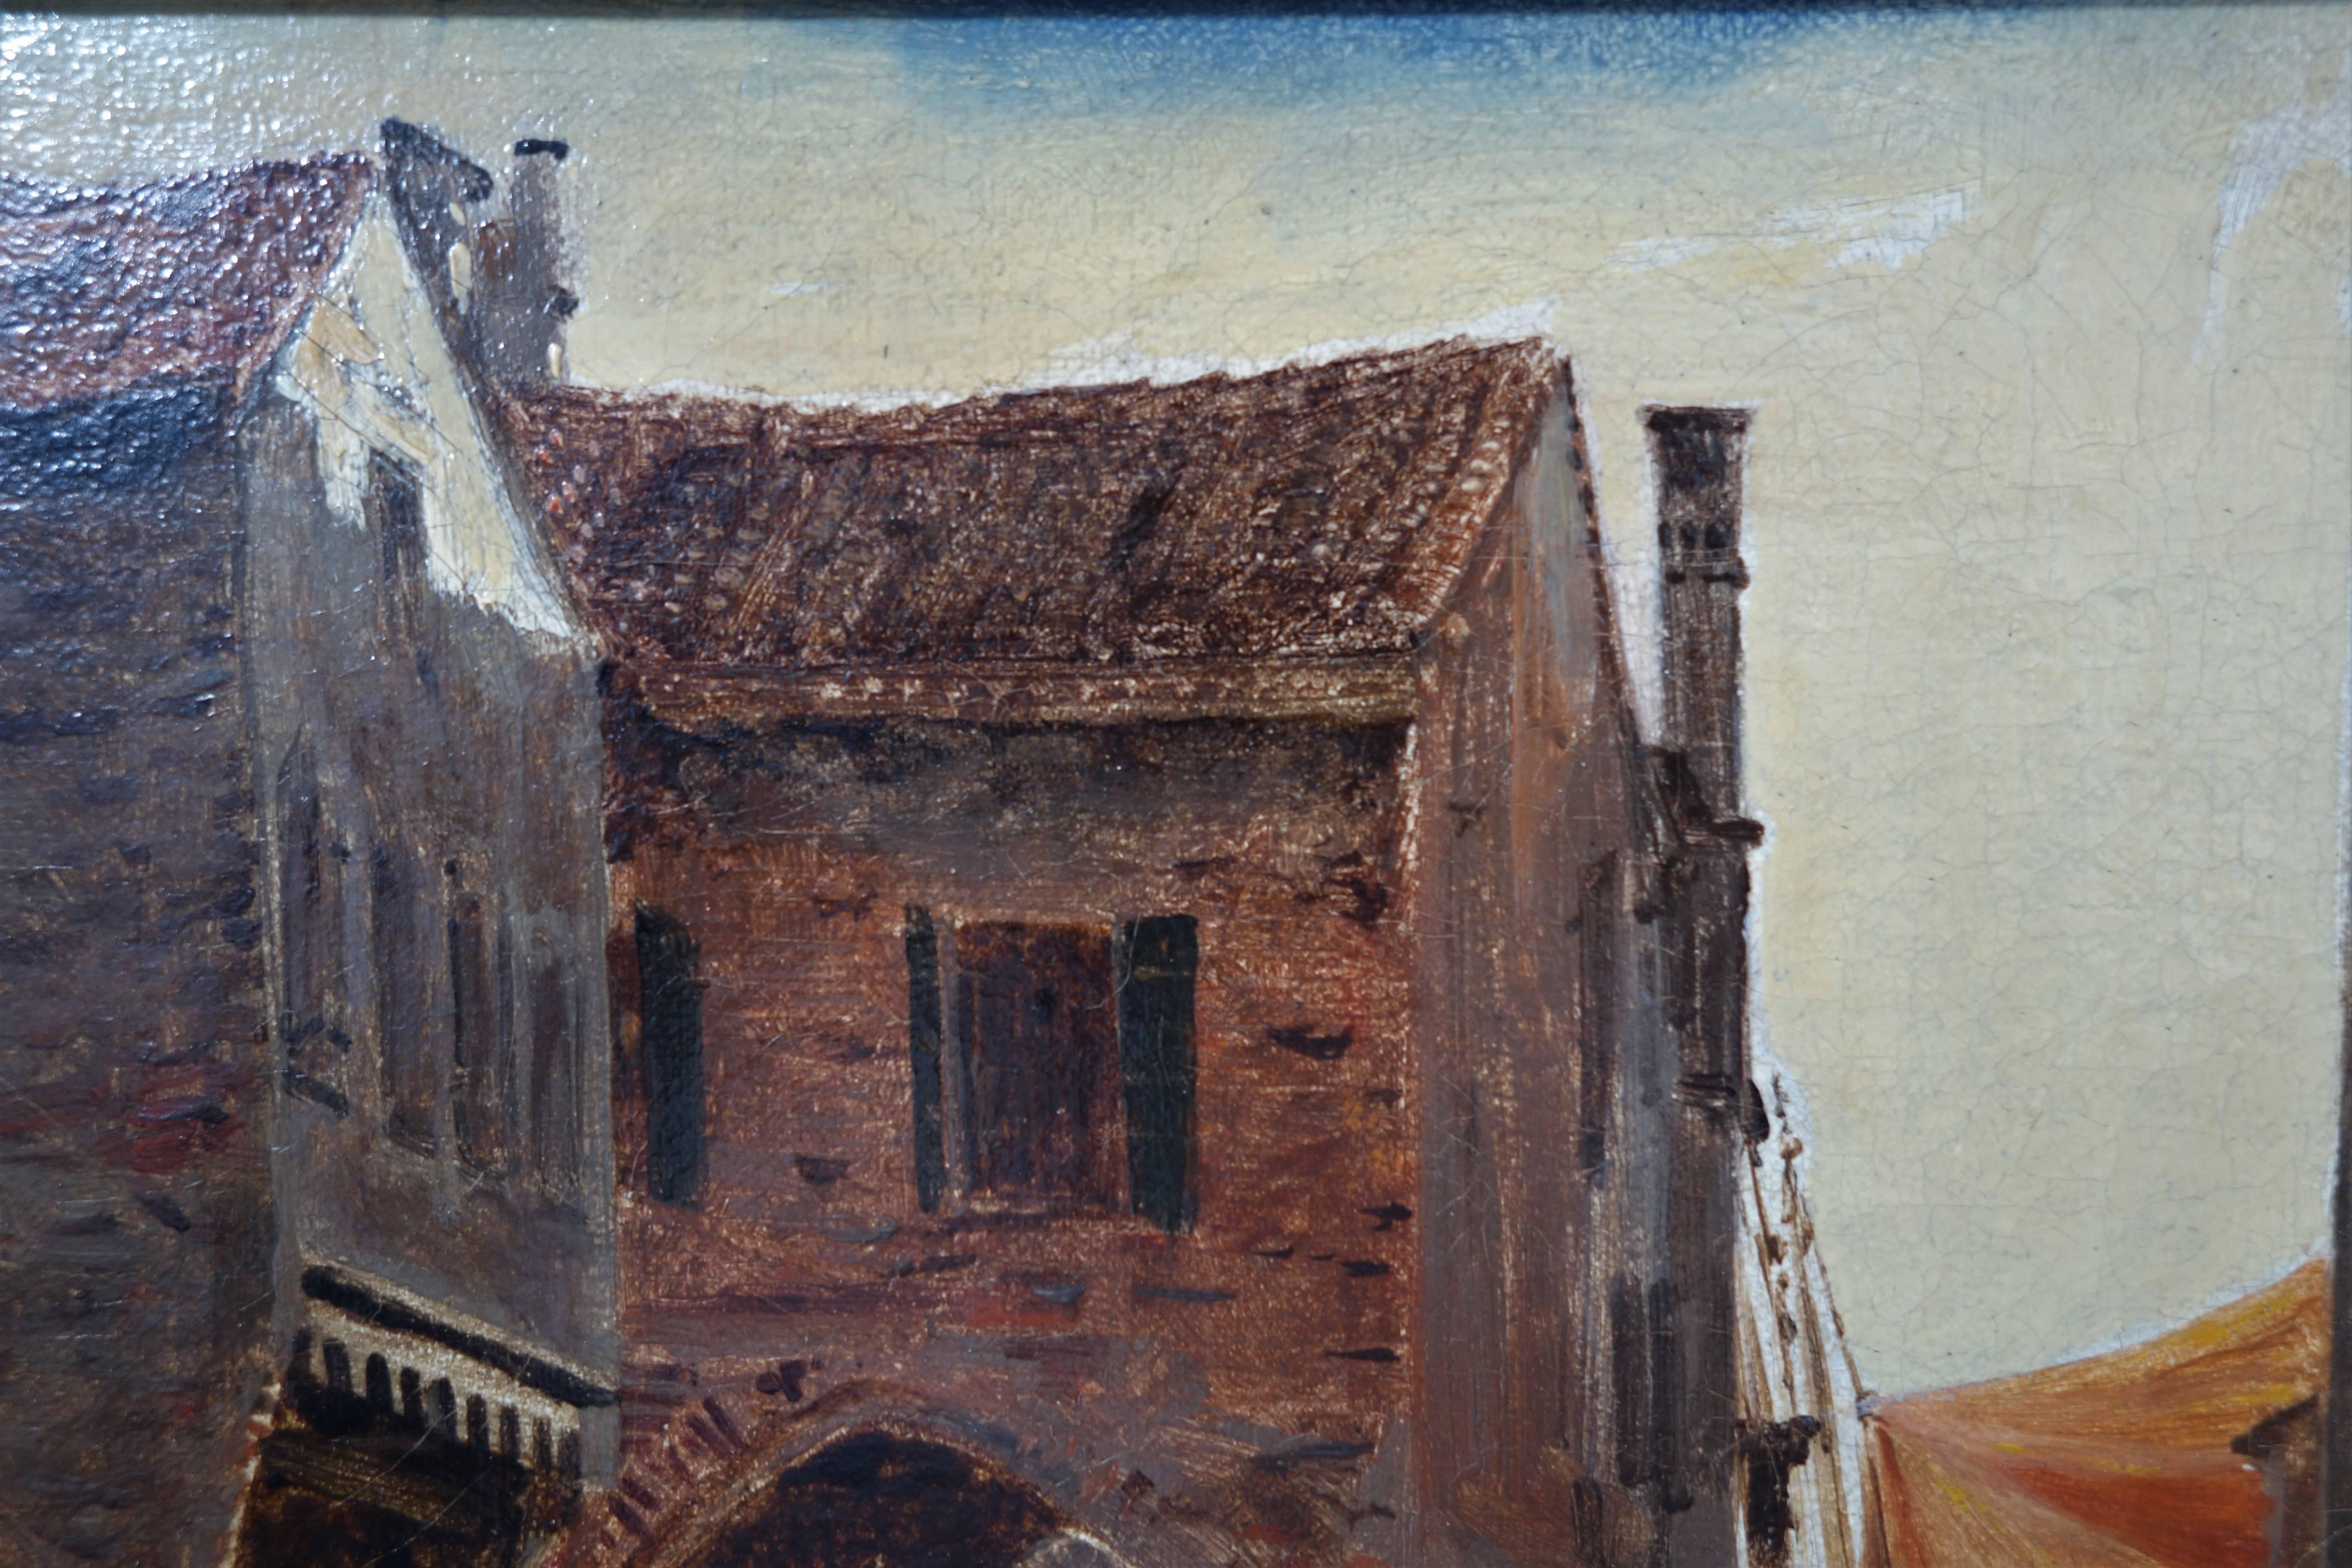 Other I.T. Hansen, Oil Painting, Street in Chioggia by Venice, Italy, 1889